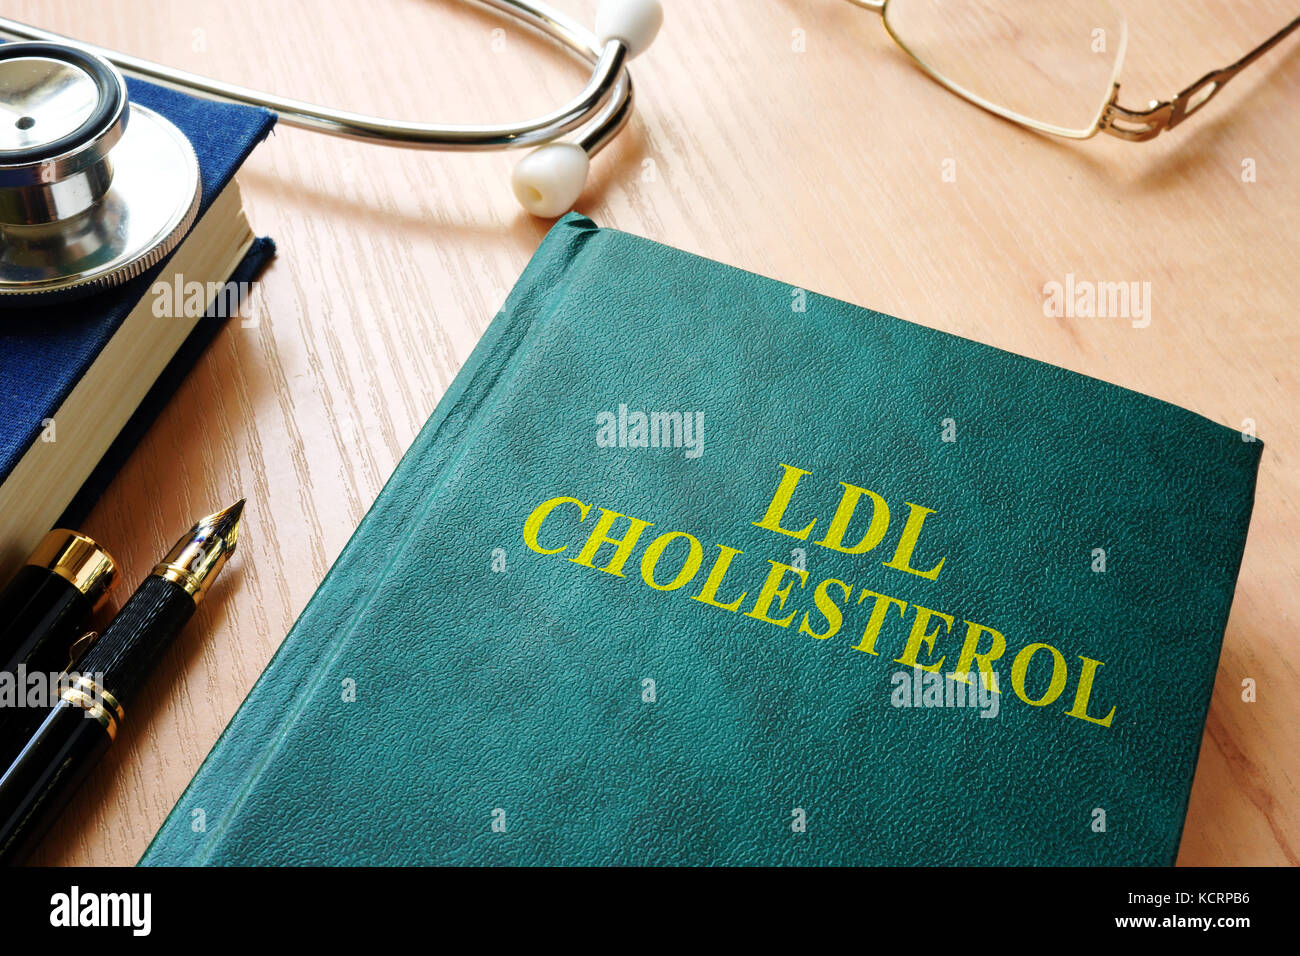 Book about ldl cholesterol. Stock Photo